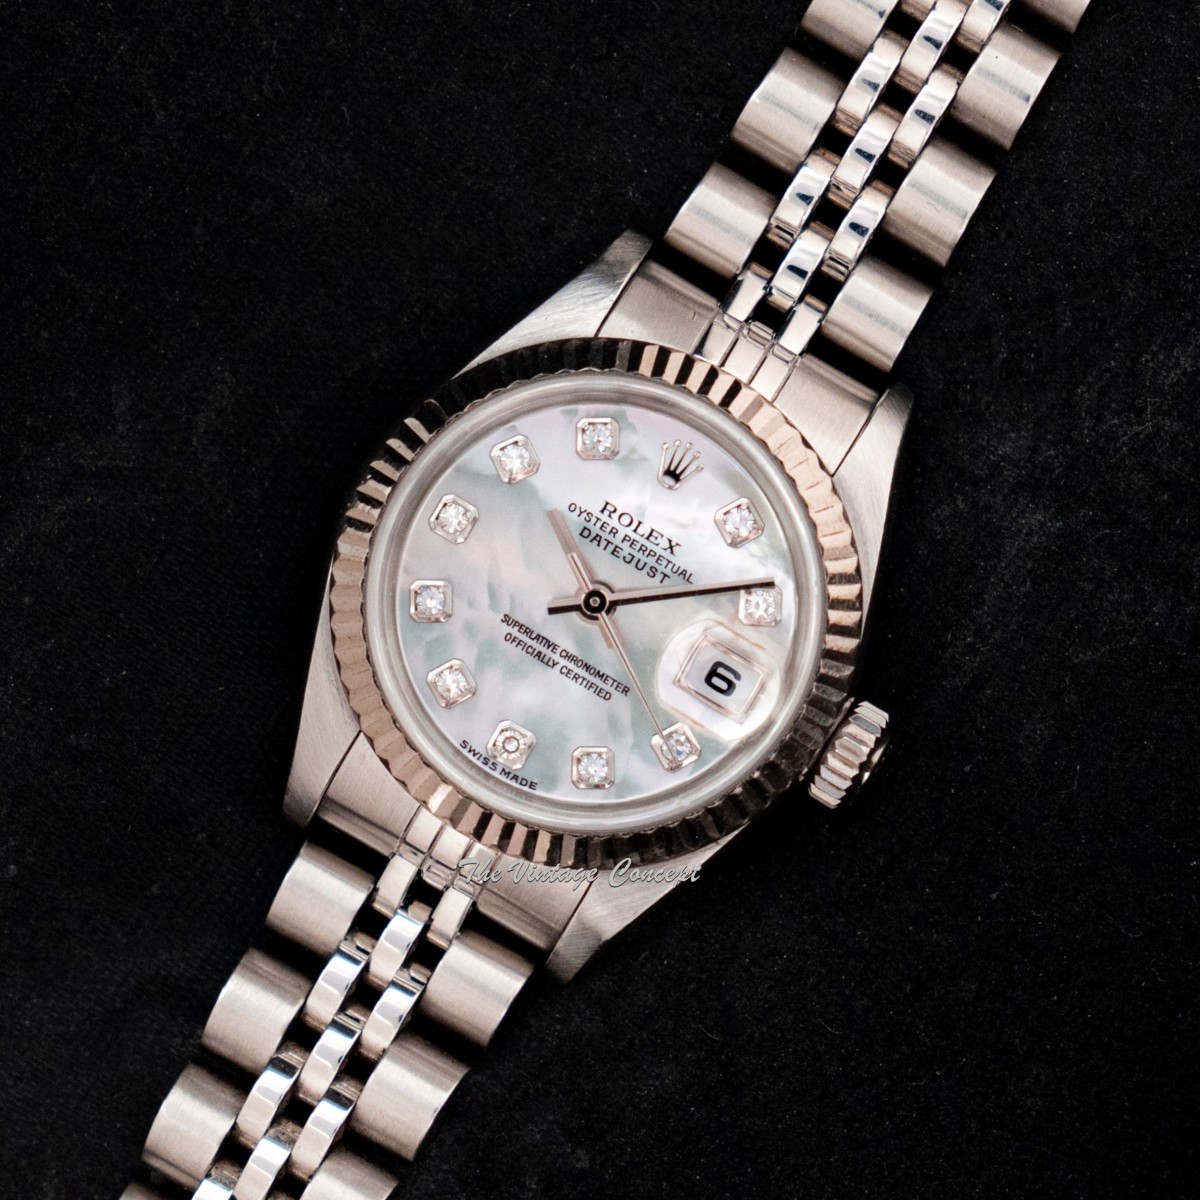 Rolex Steel Lady 26mm Datejust Mother of Pearl MOP Dial w/ Diamond Indexes 79174 (SOLD)